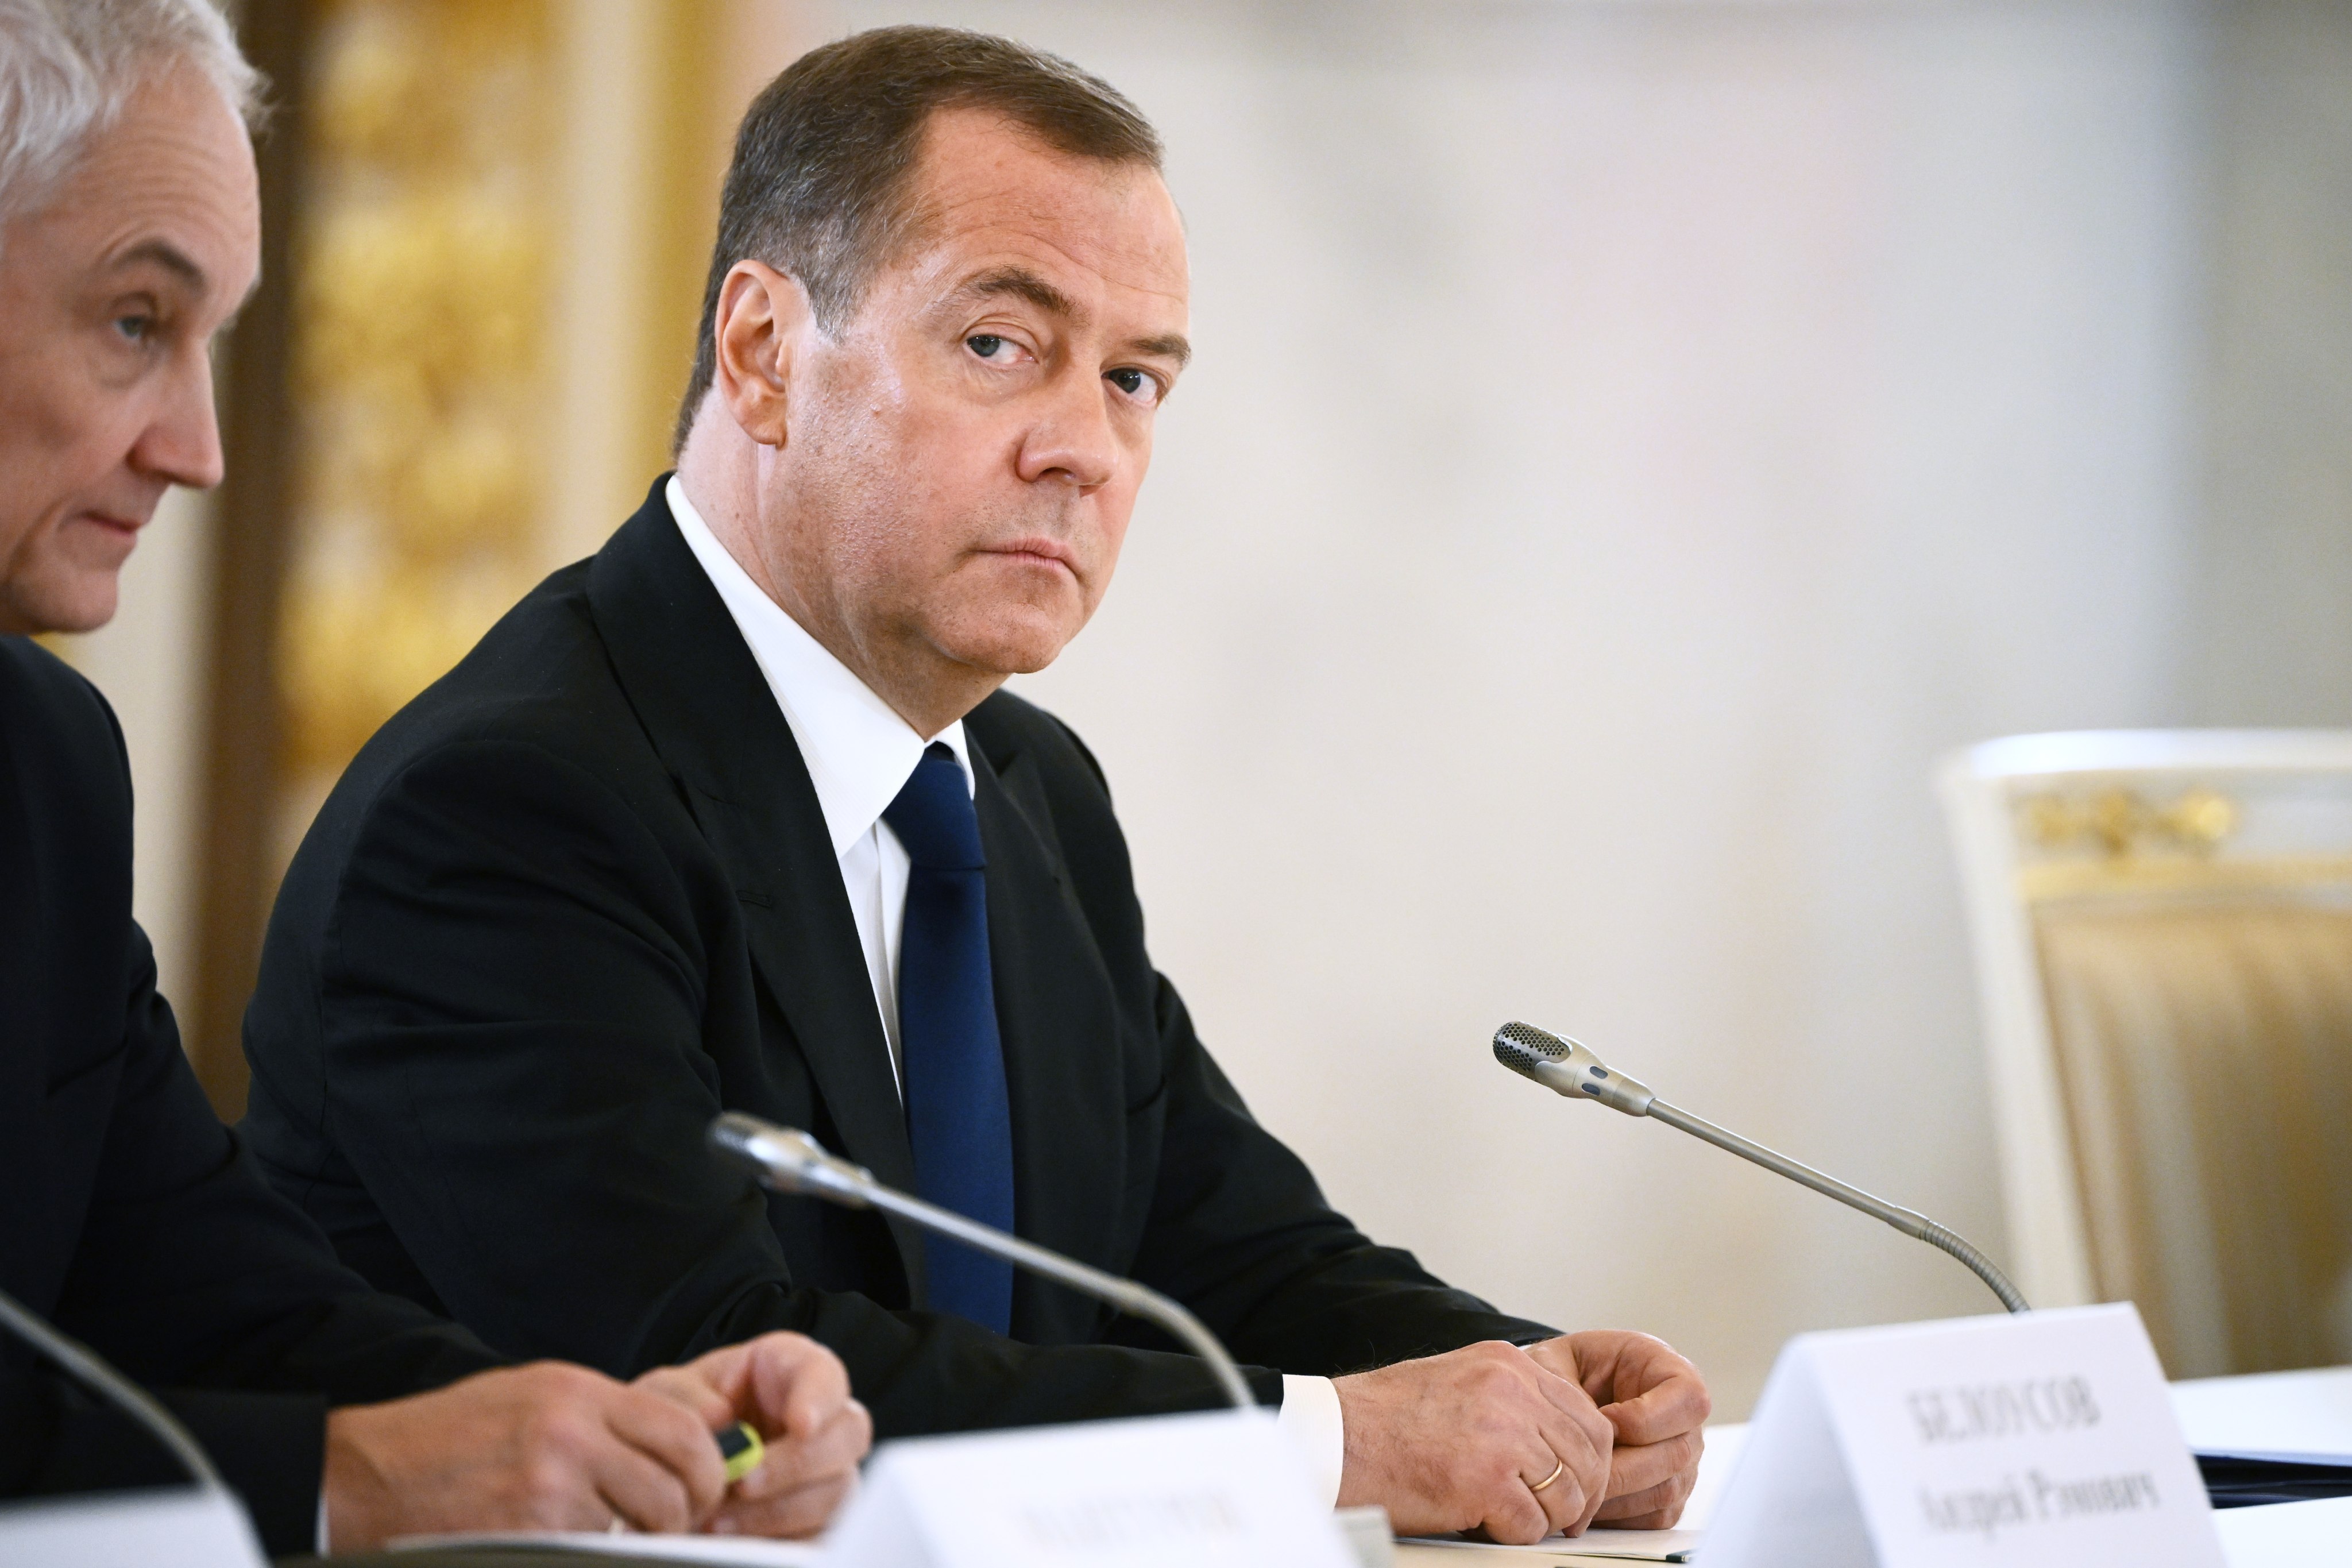 Deputy head of Russia’s Security Council Dmitry Medvedev launched anti-Western diatribes and the threat of a nuclear apocalypse. Photo: EPA-EFE